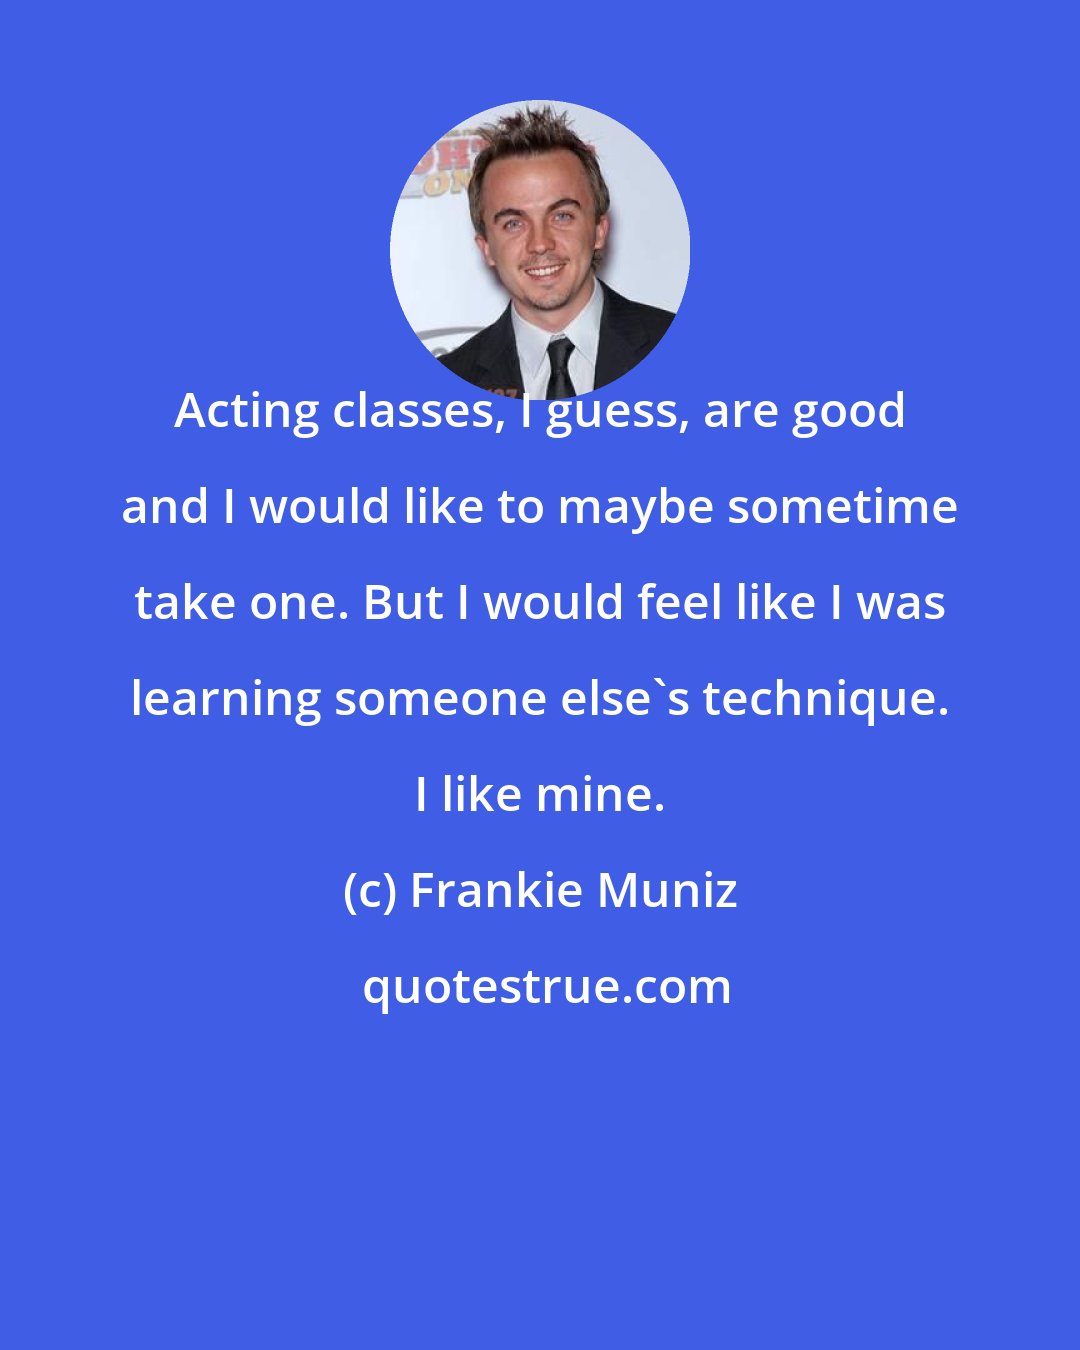 Frankie Muniz: Acting classes, I guess, are good and I would like to maybe sometime take one. But I would feel like I was learning someone else's technique. I like mine.